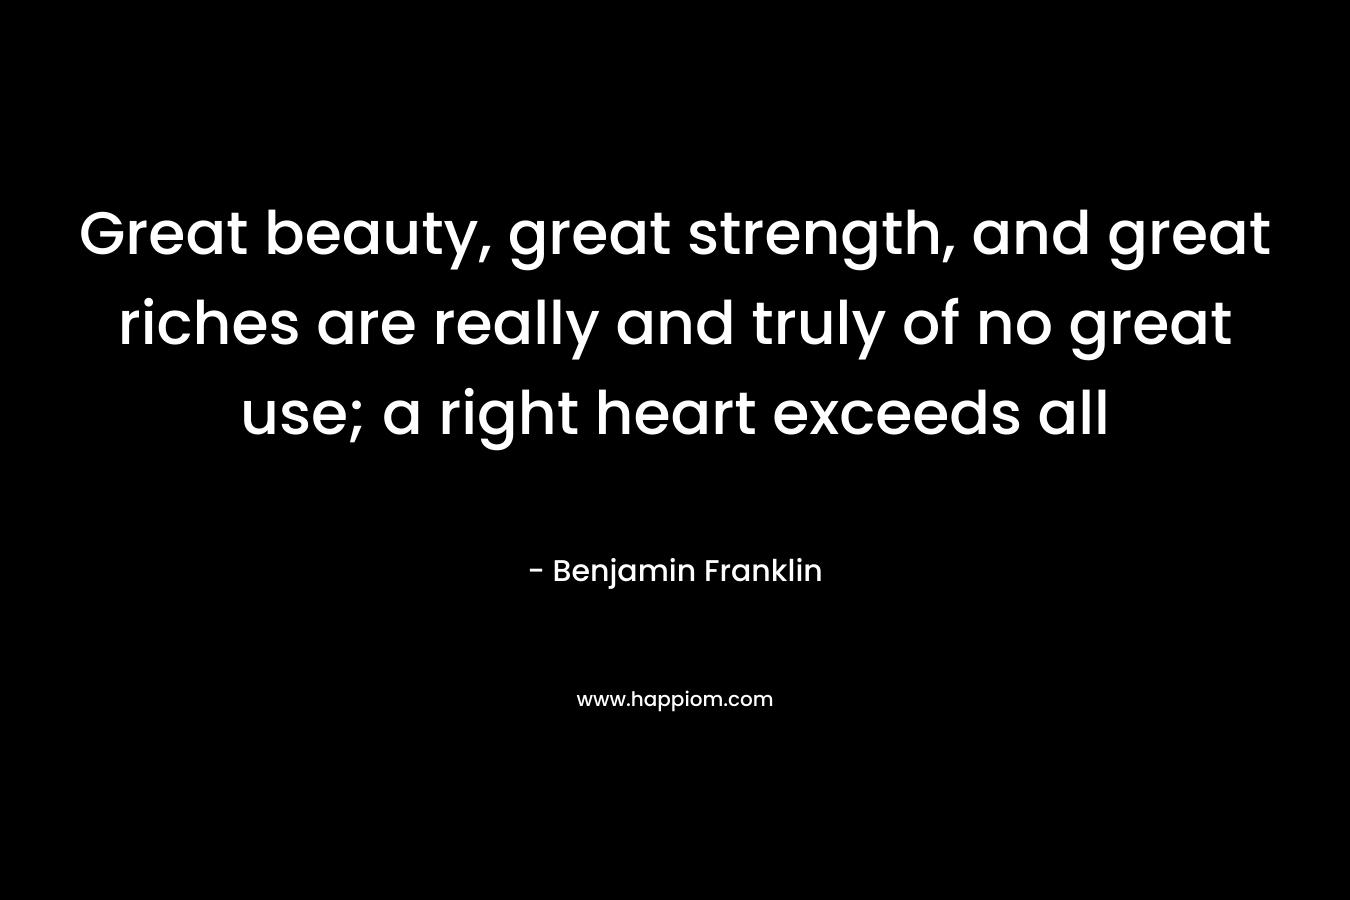 Great beauty, great strength, and great riches are really and truly of no great use; a right heart exceeds all – Benjamin Franklin